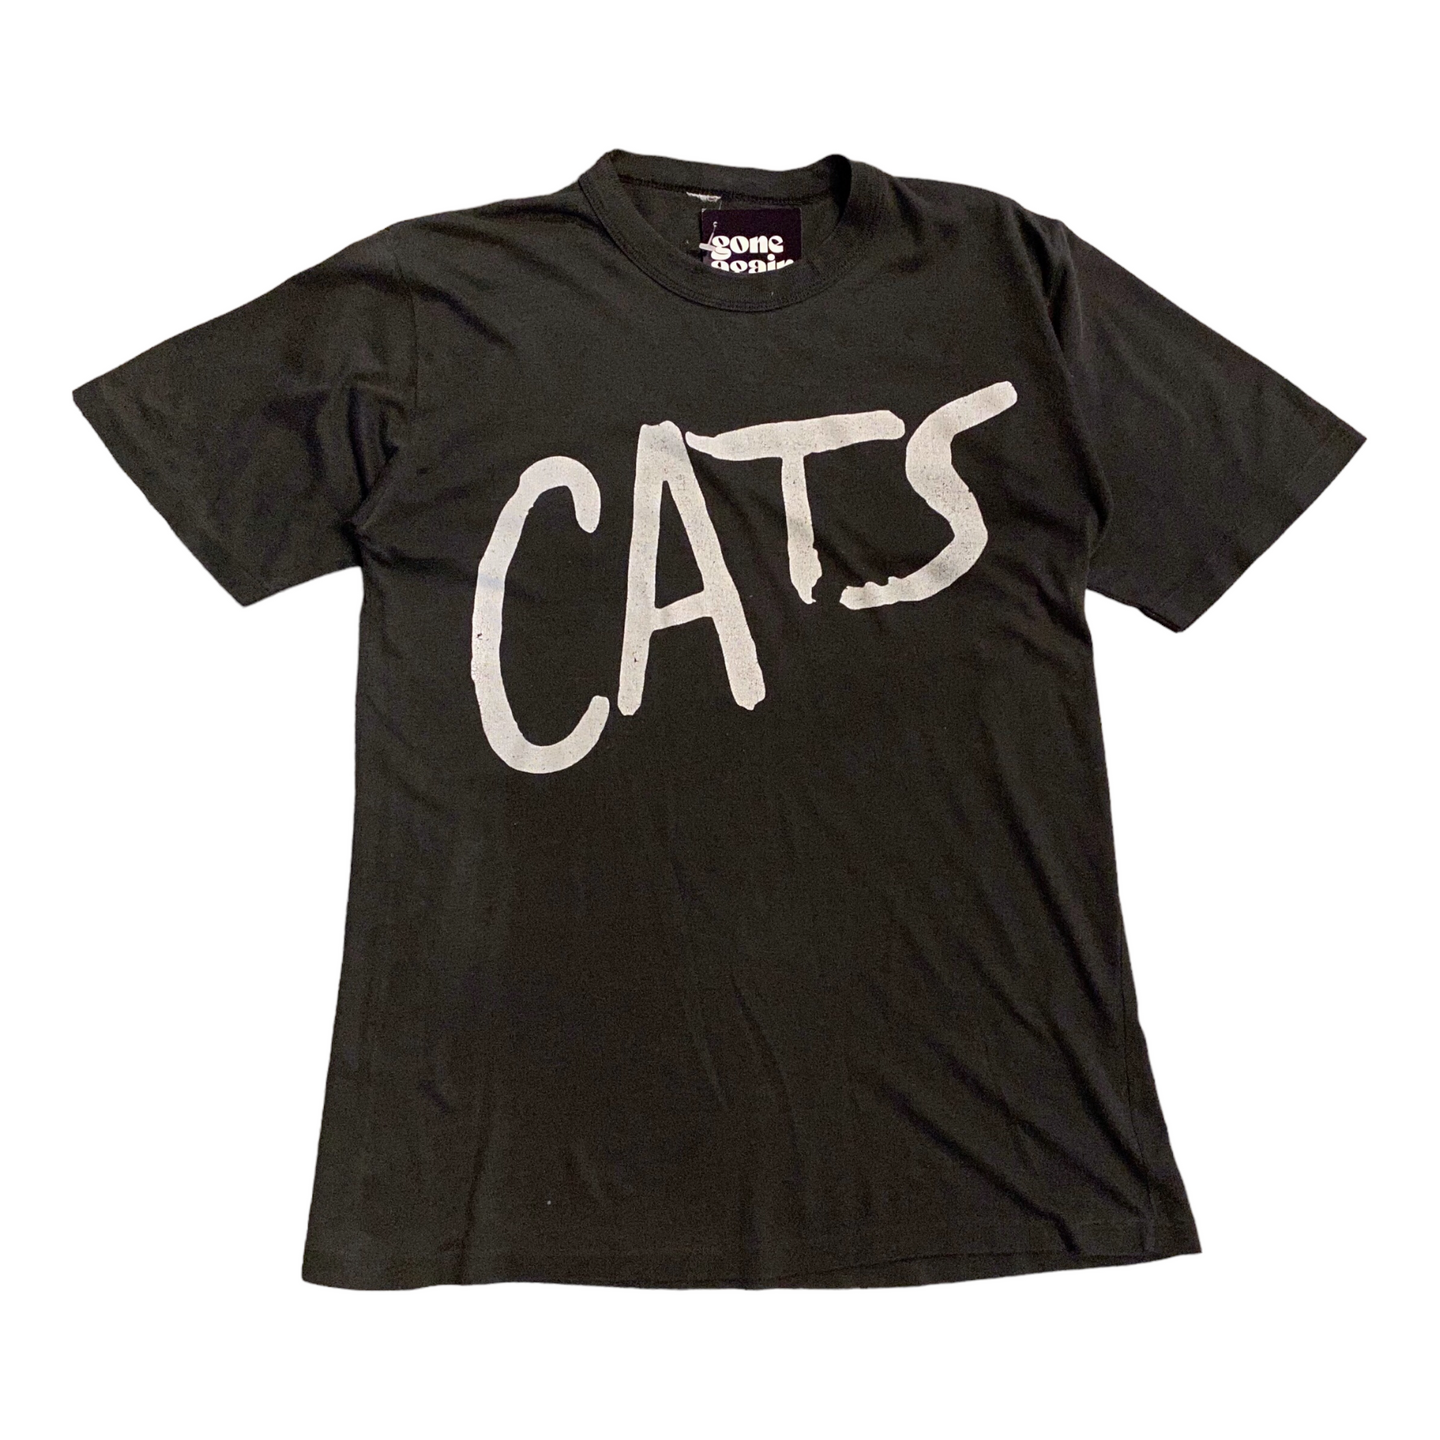 Vintage CATS Graphic Tee M